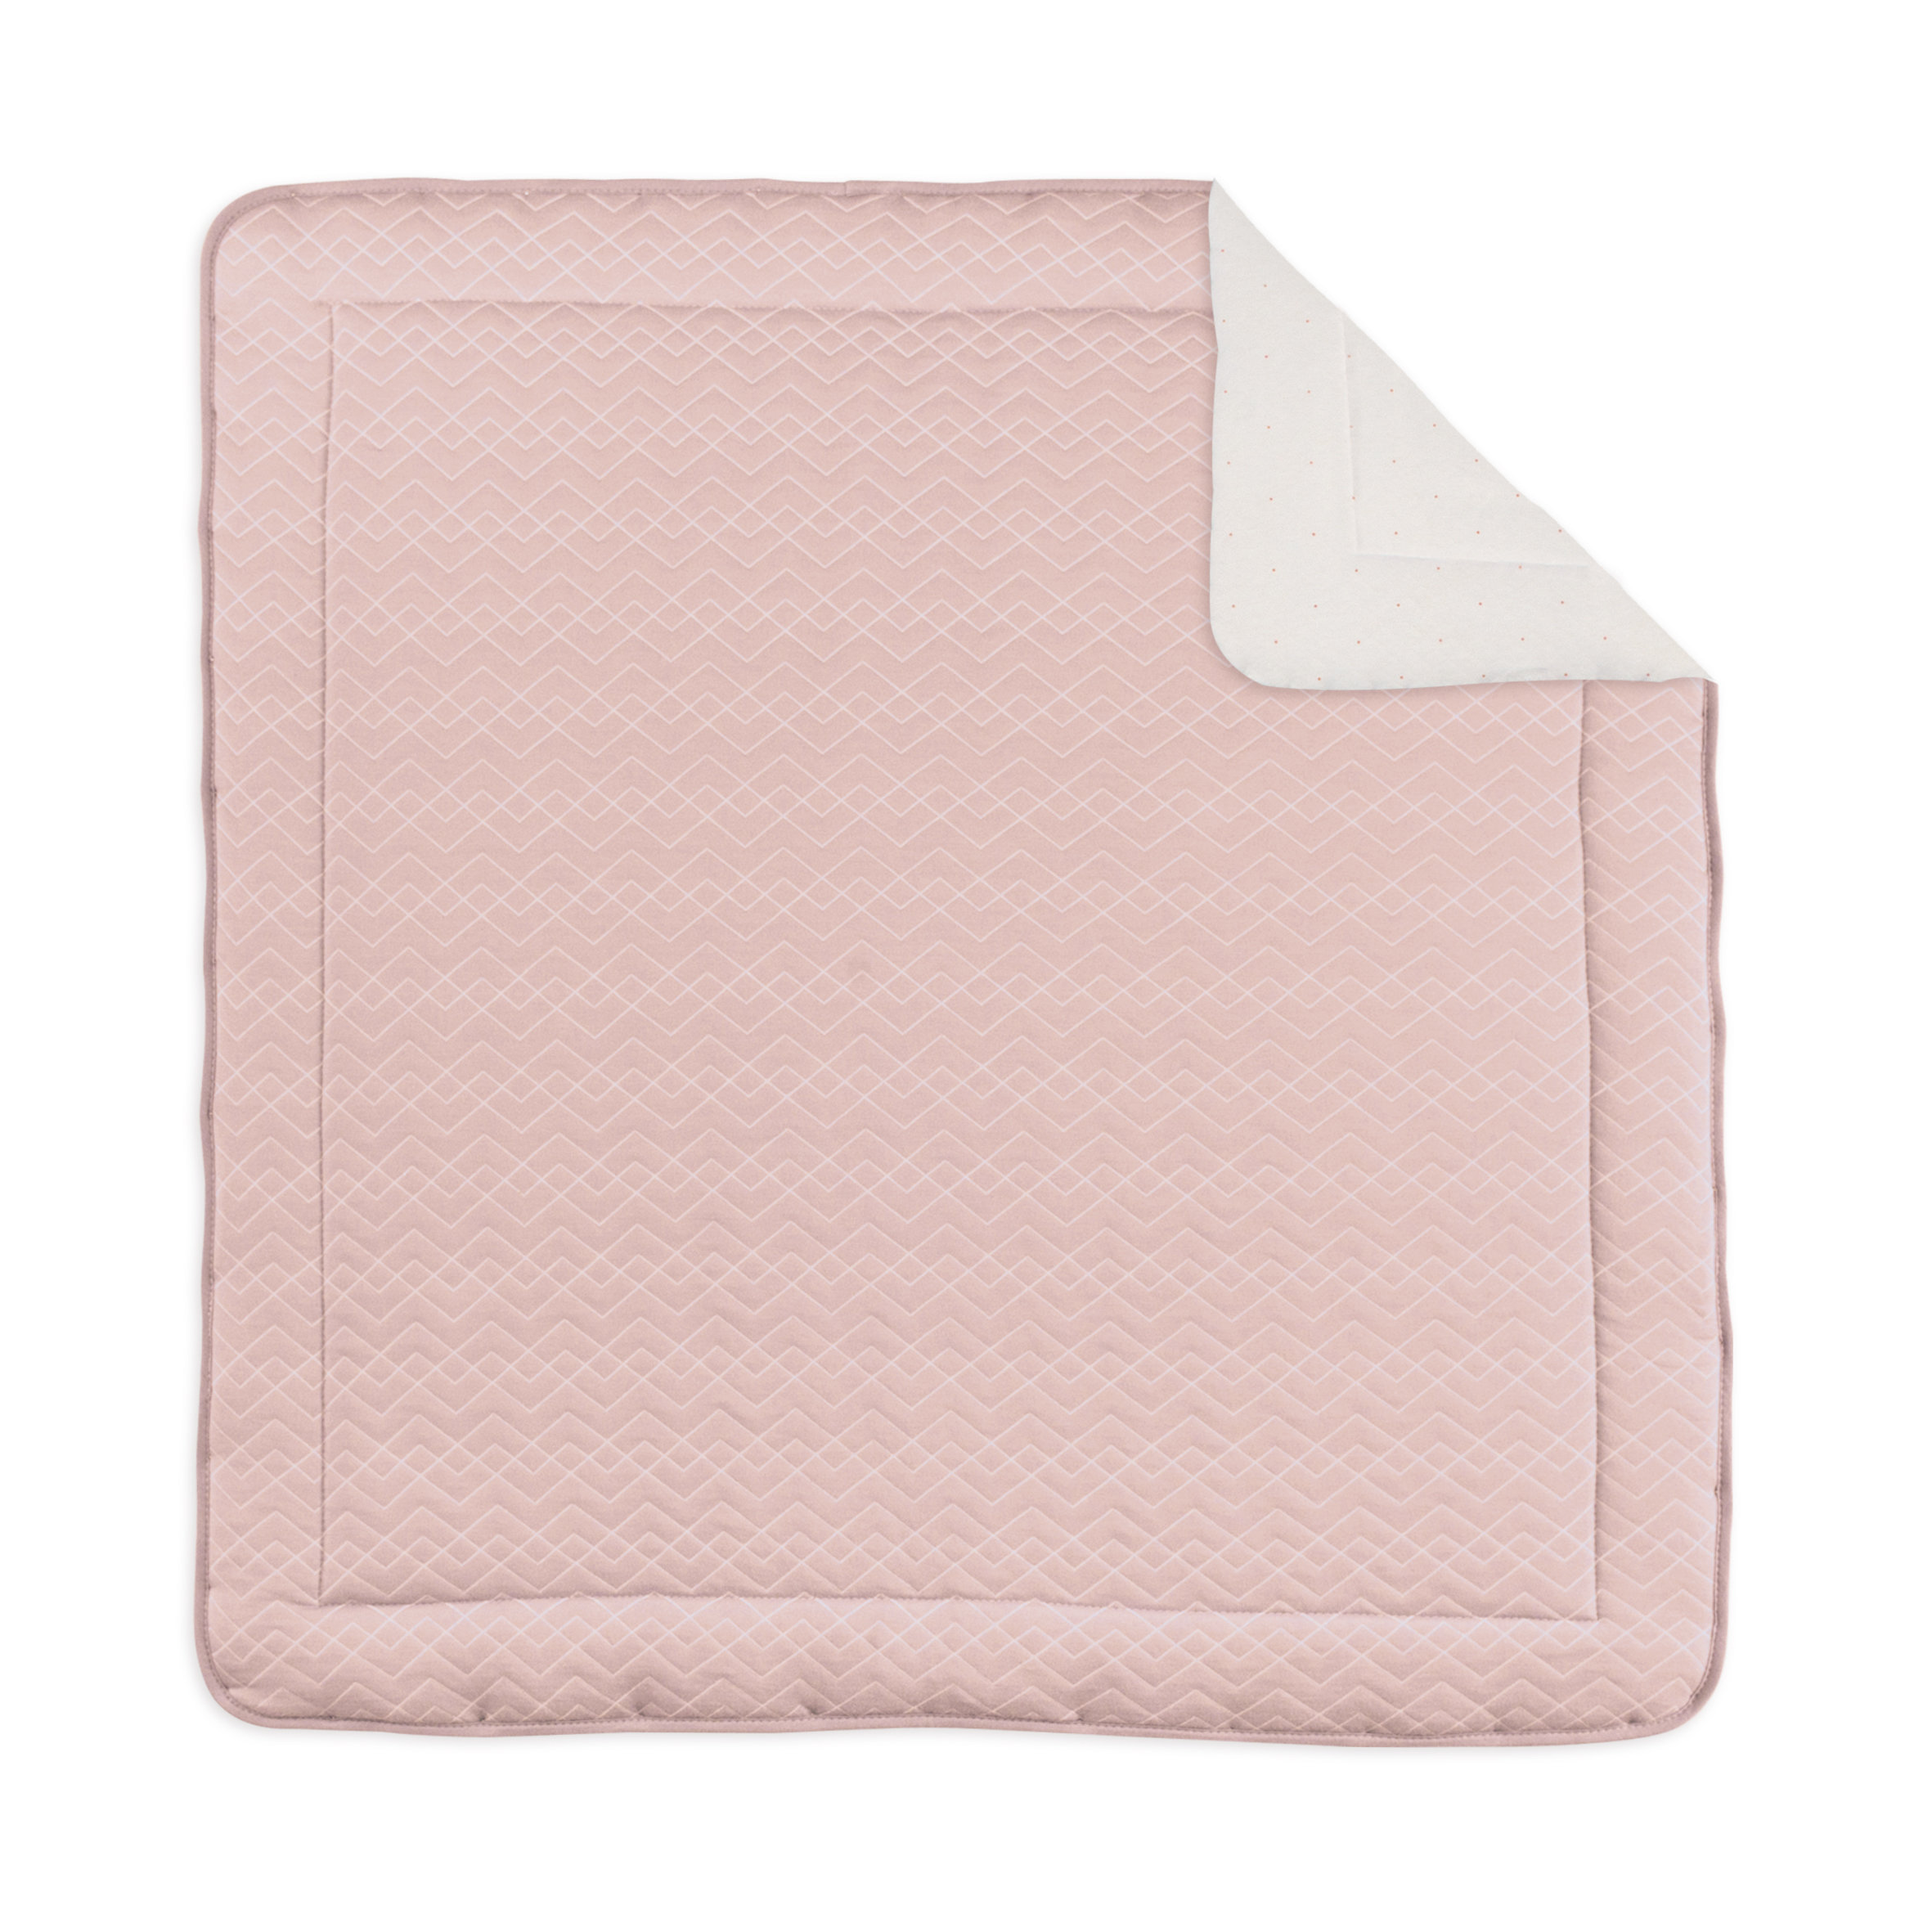 Playpen mat Pady quilted jersey + jersey 100x100cm OSAKA Old pink